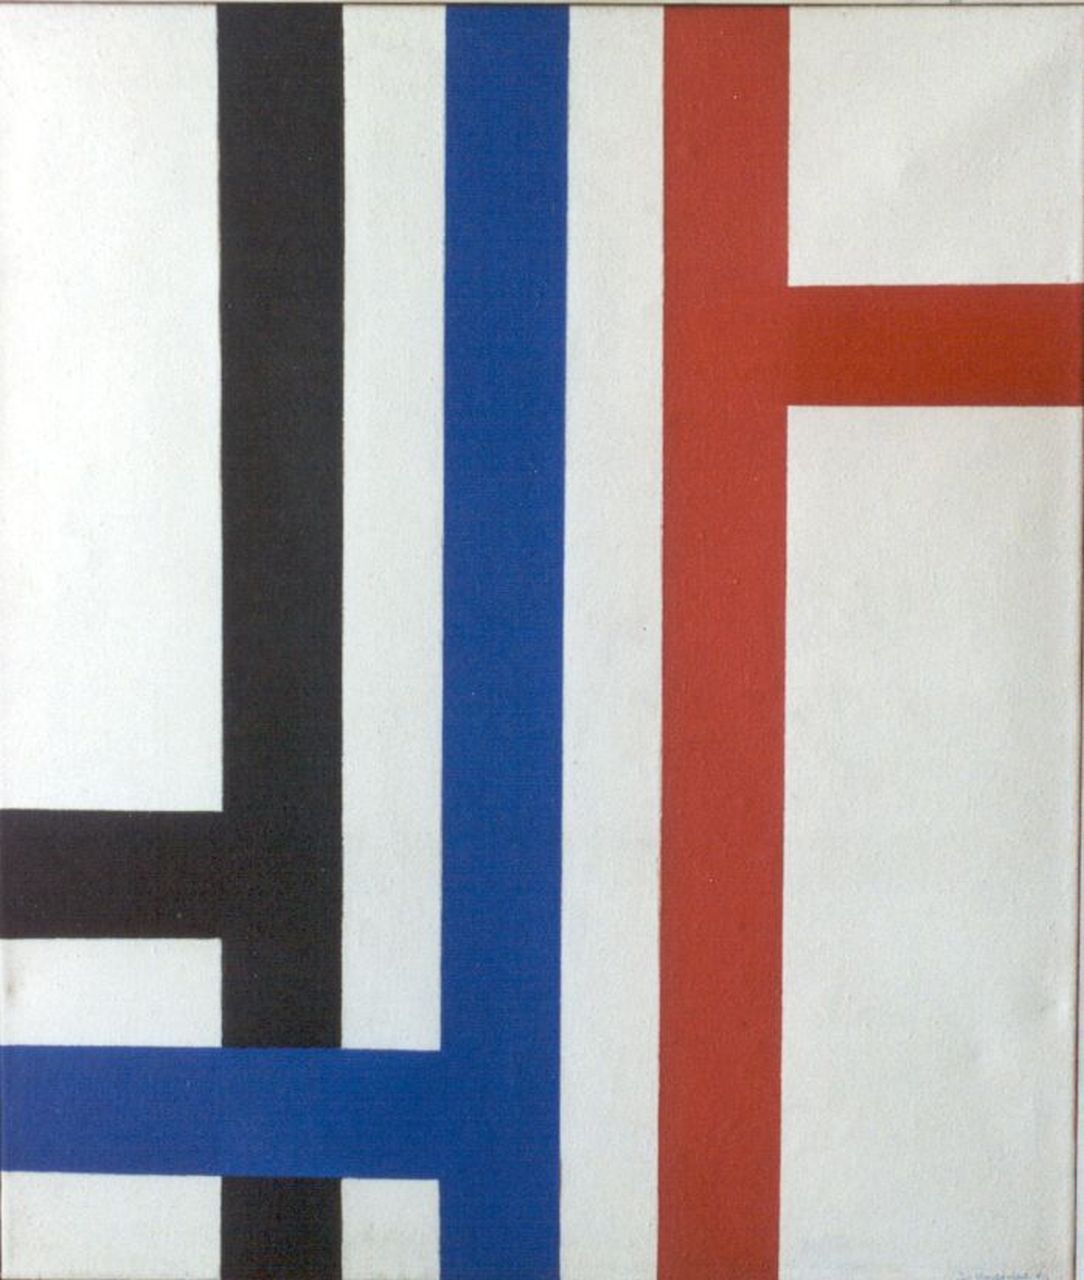 Joop Vreugdenhil | T 2, oil on canvas, 130.0 x 110.0 cm, signed l.r. and dated '67